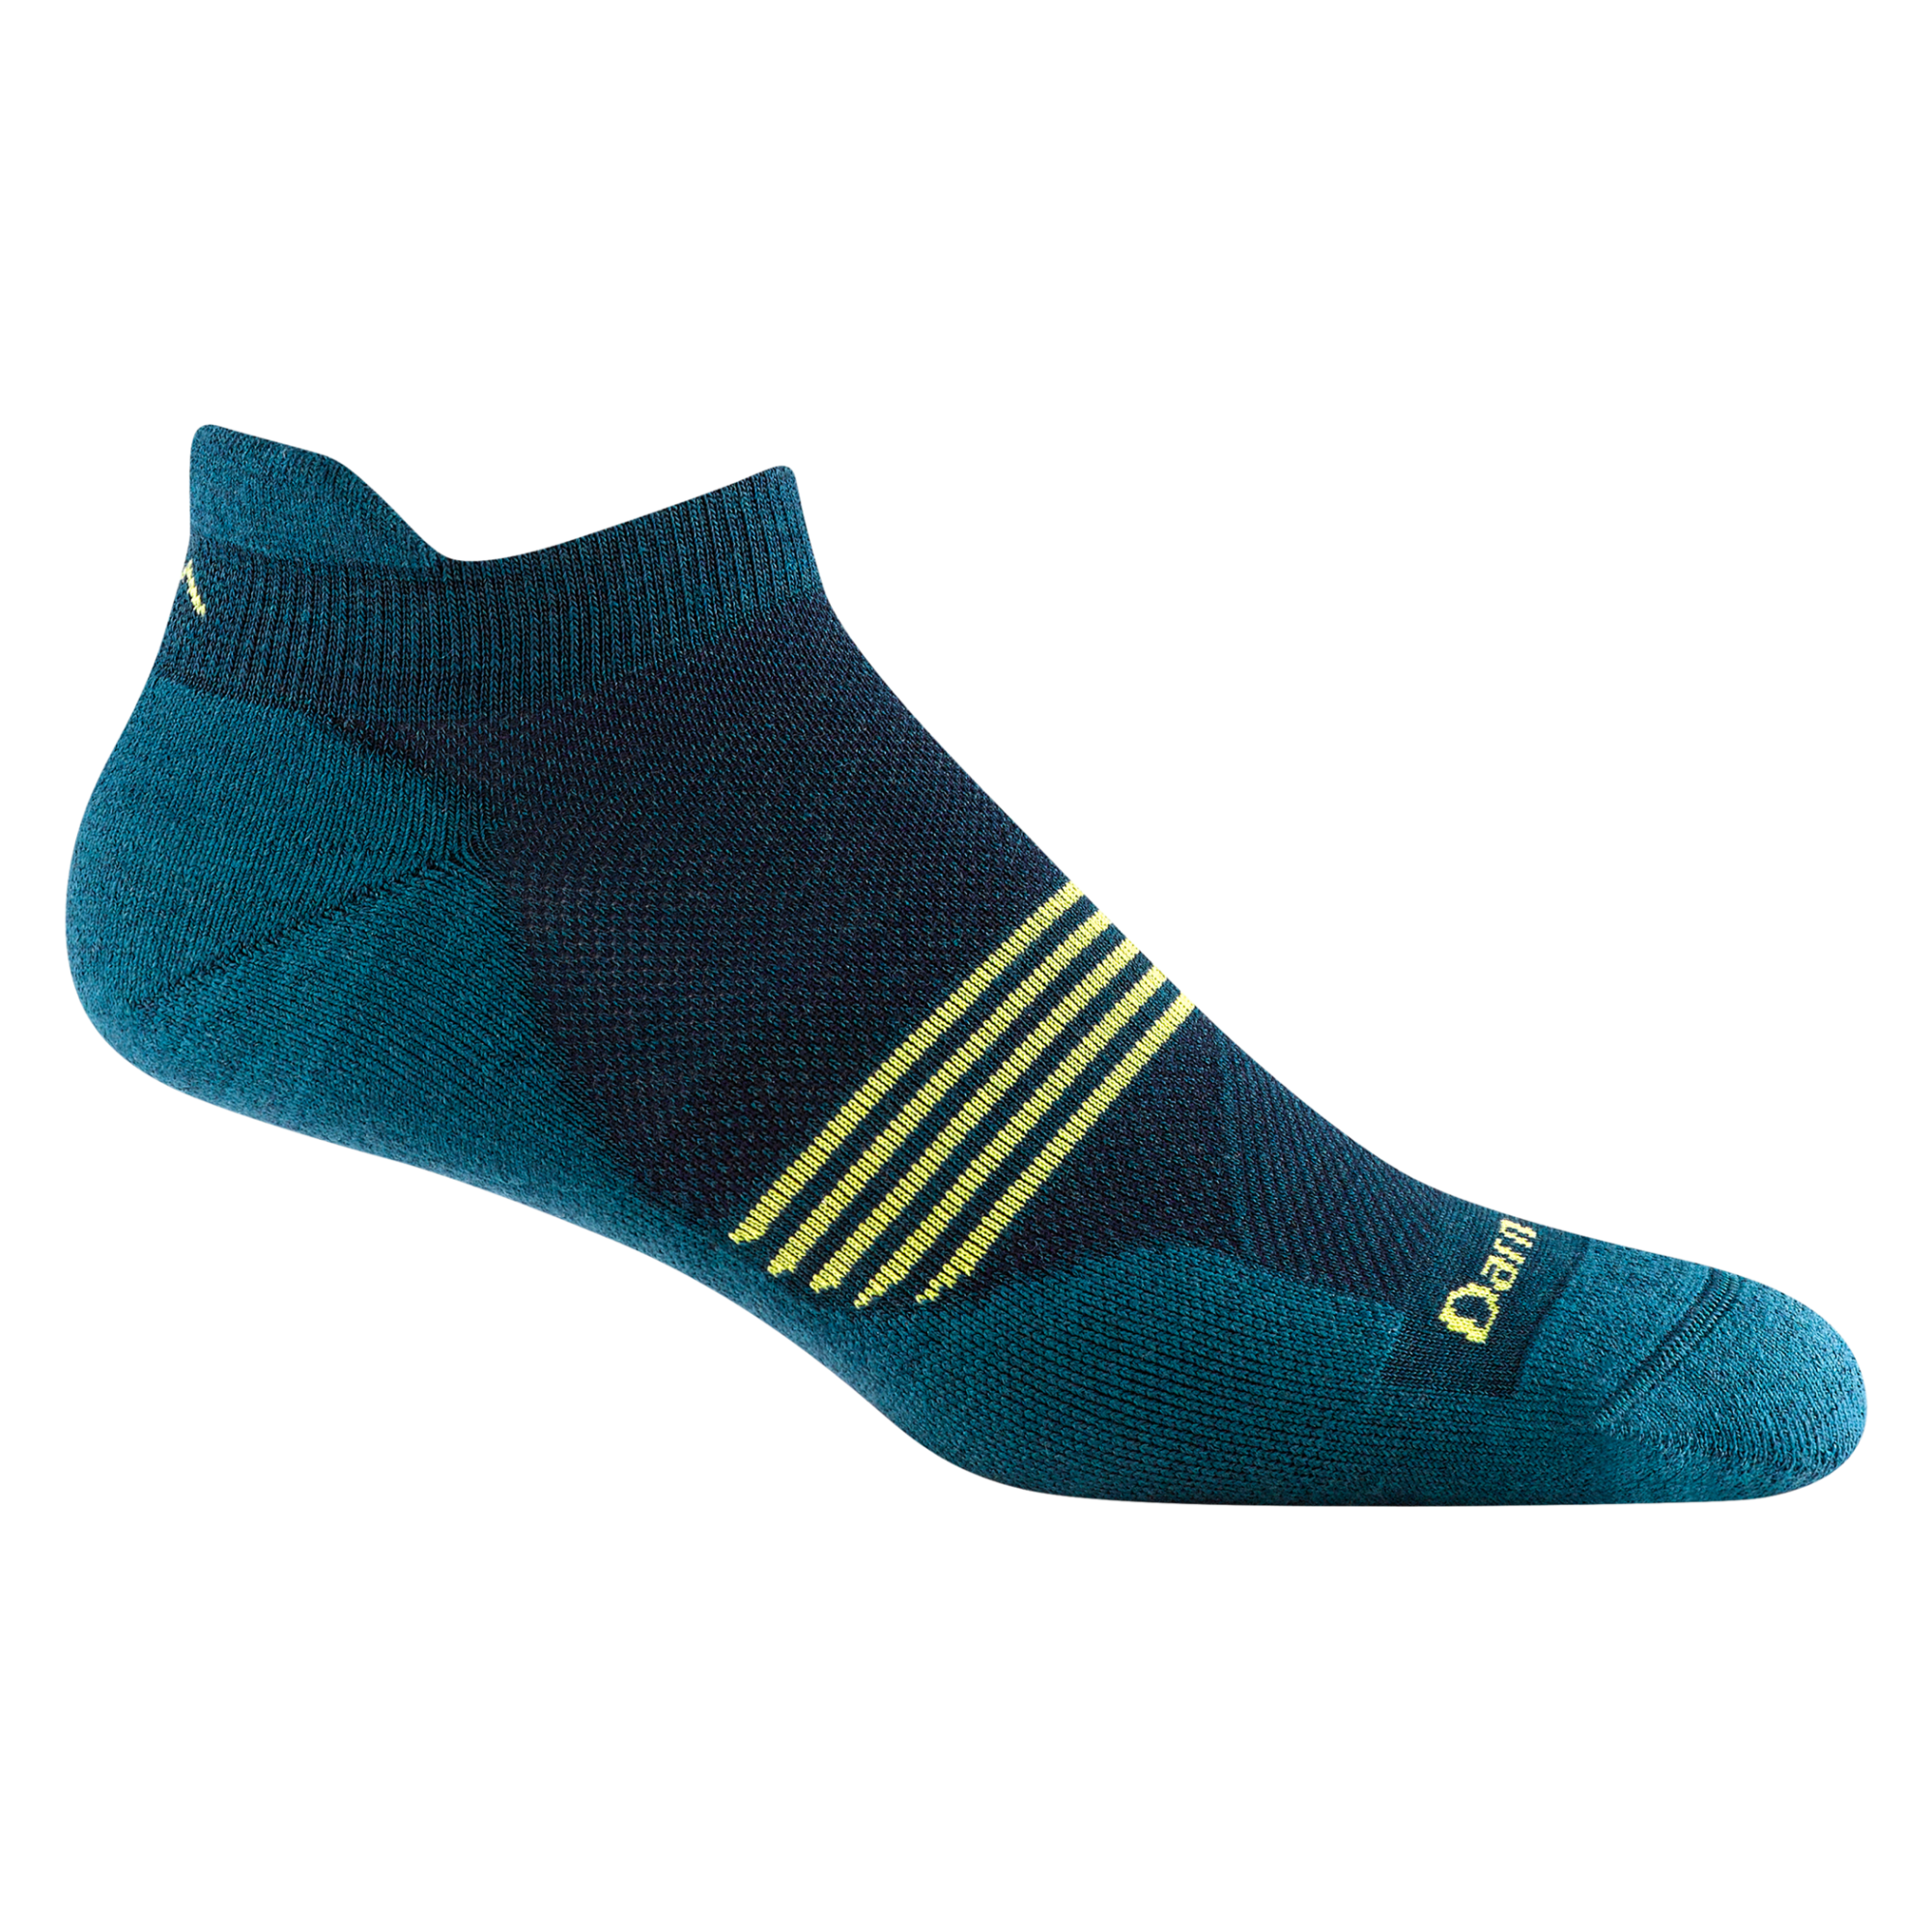 1116 men's element no-show tab running sock in dark teal with yellow horizontal forefoot striping